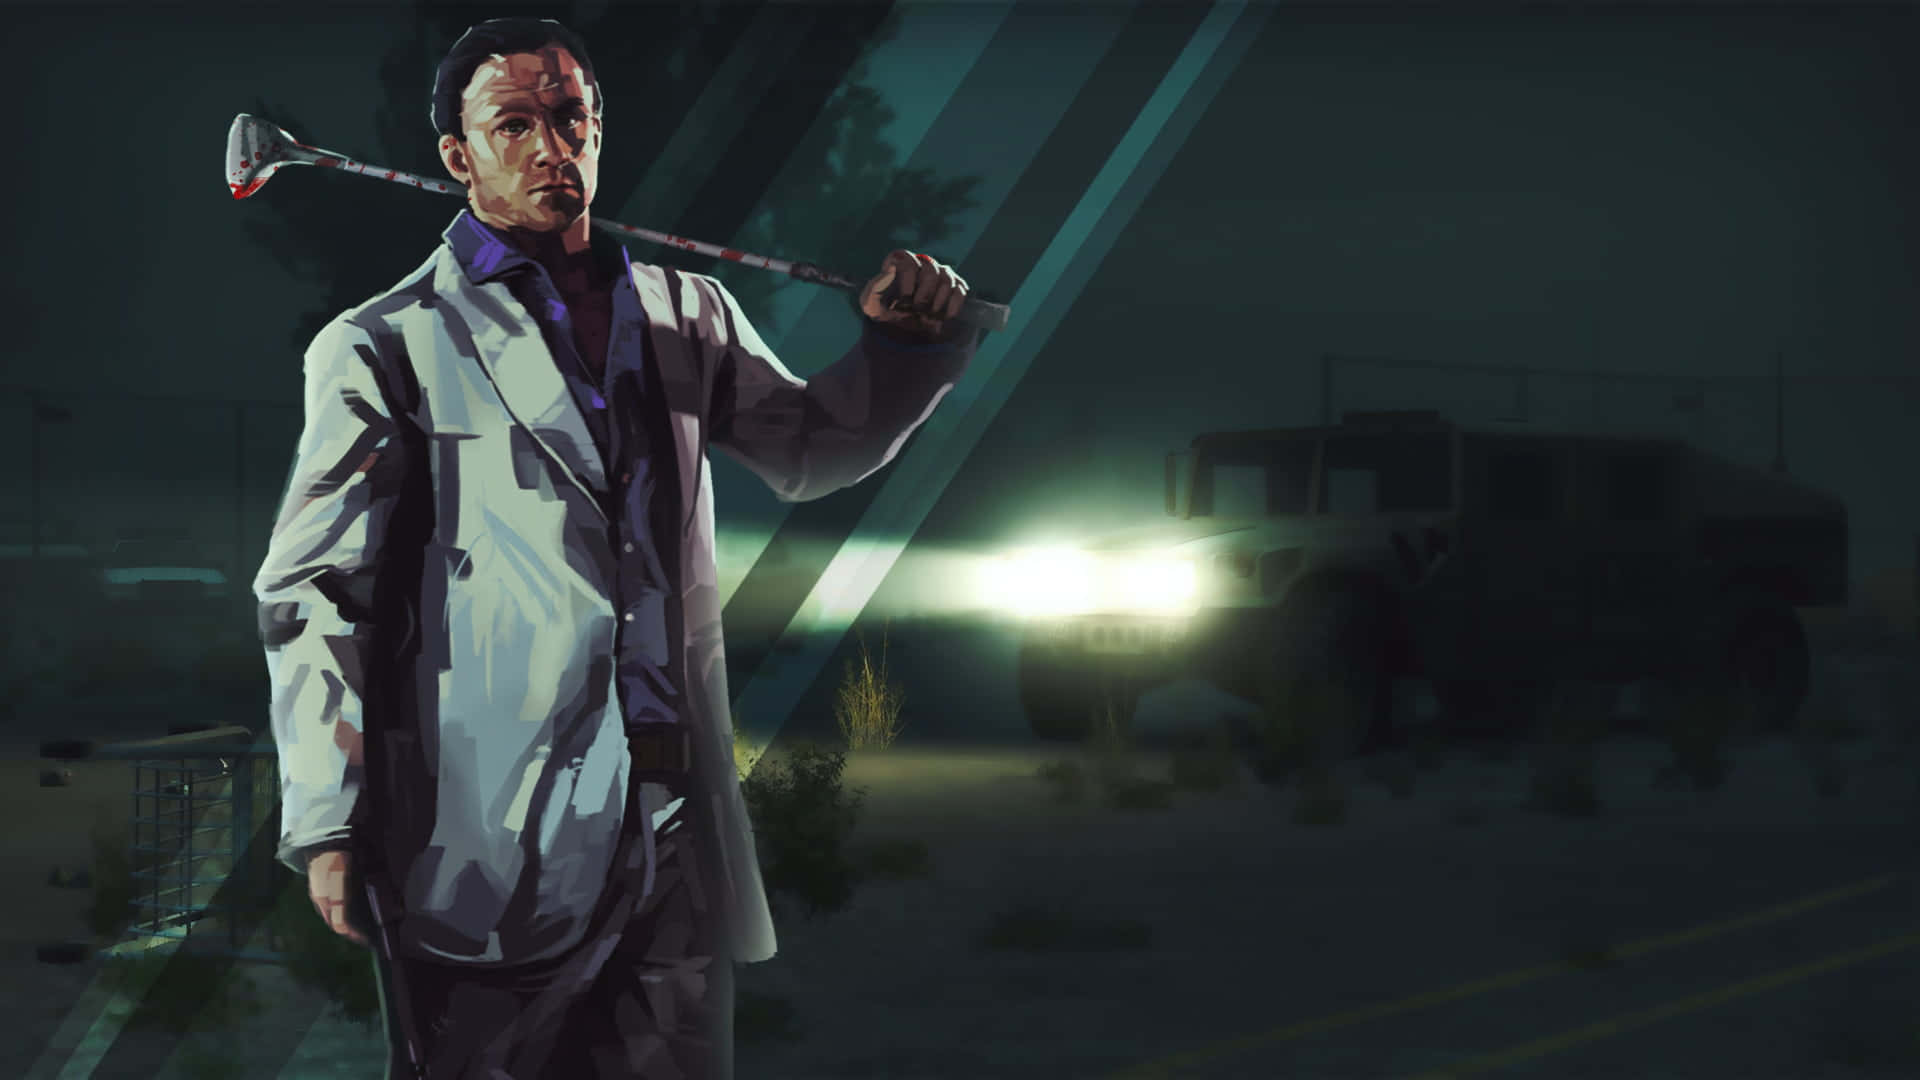 The Iconic Left 4 Dead Characters Ready for Action Wallpaper